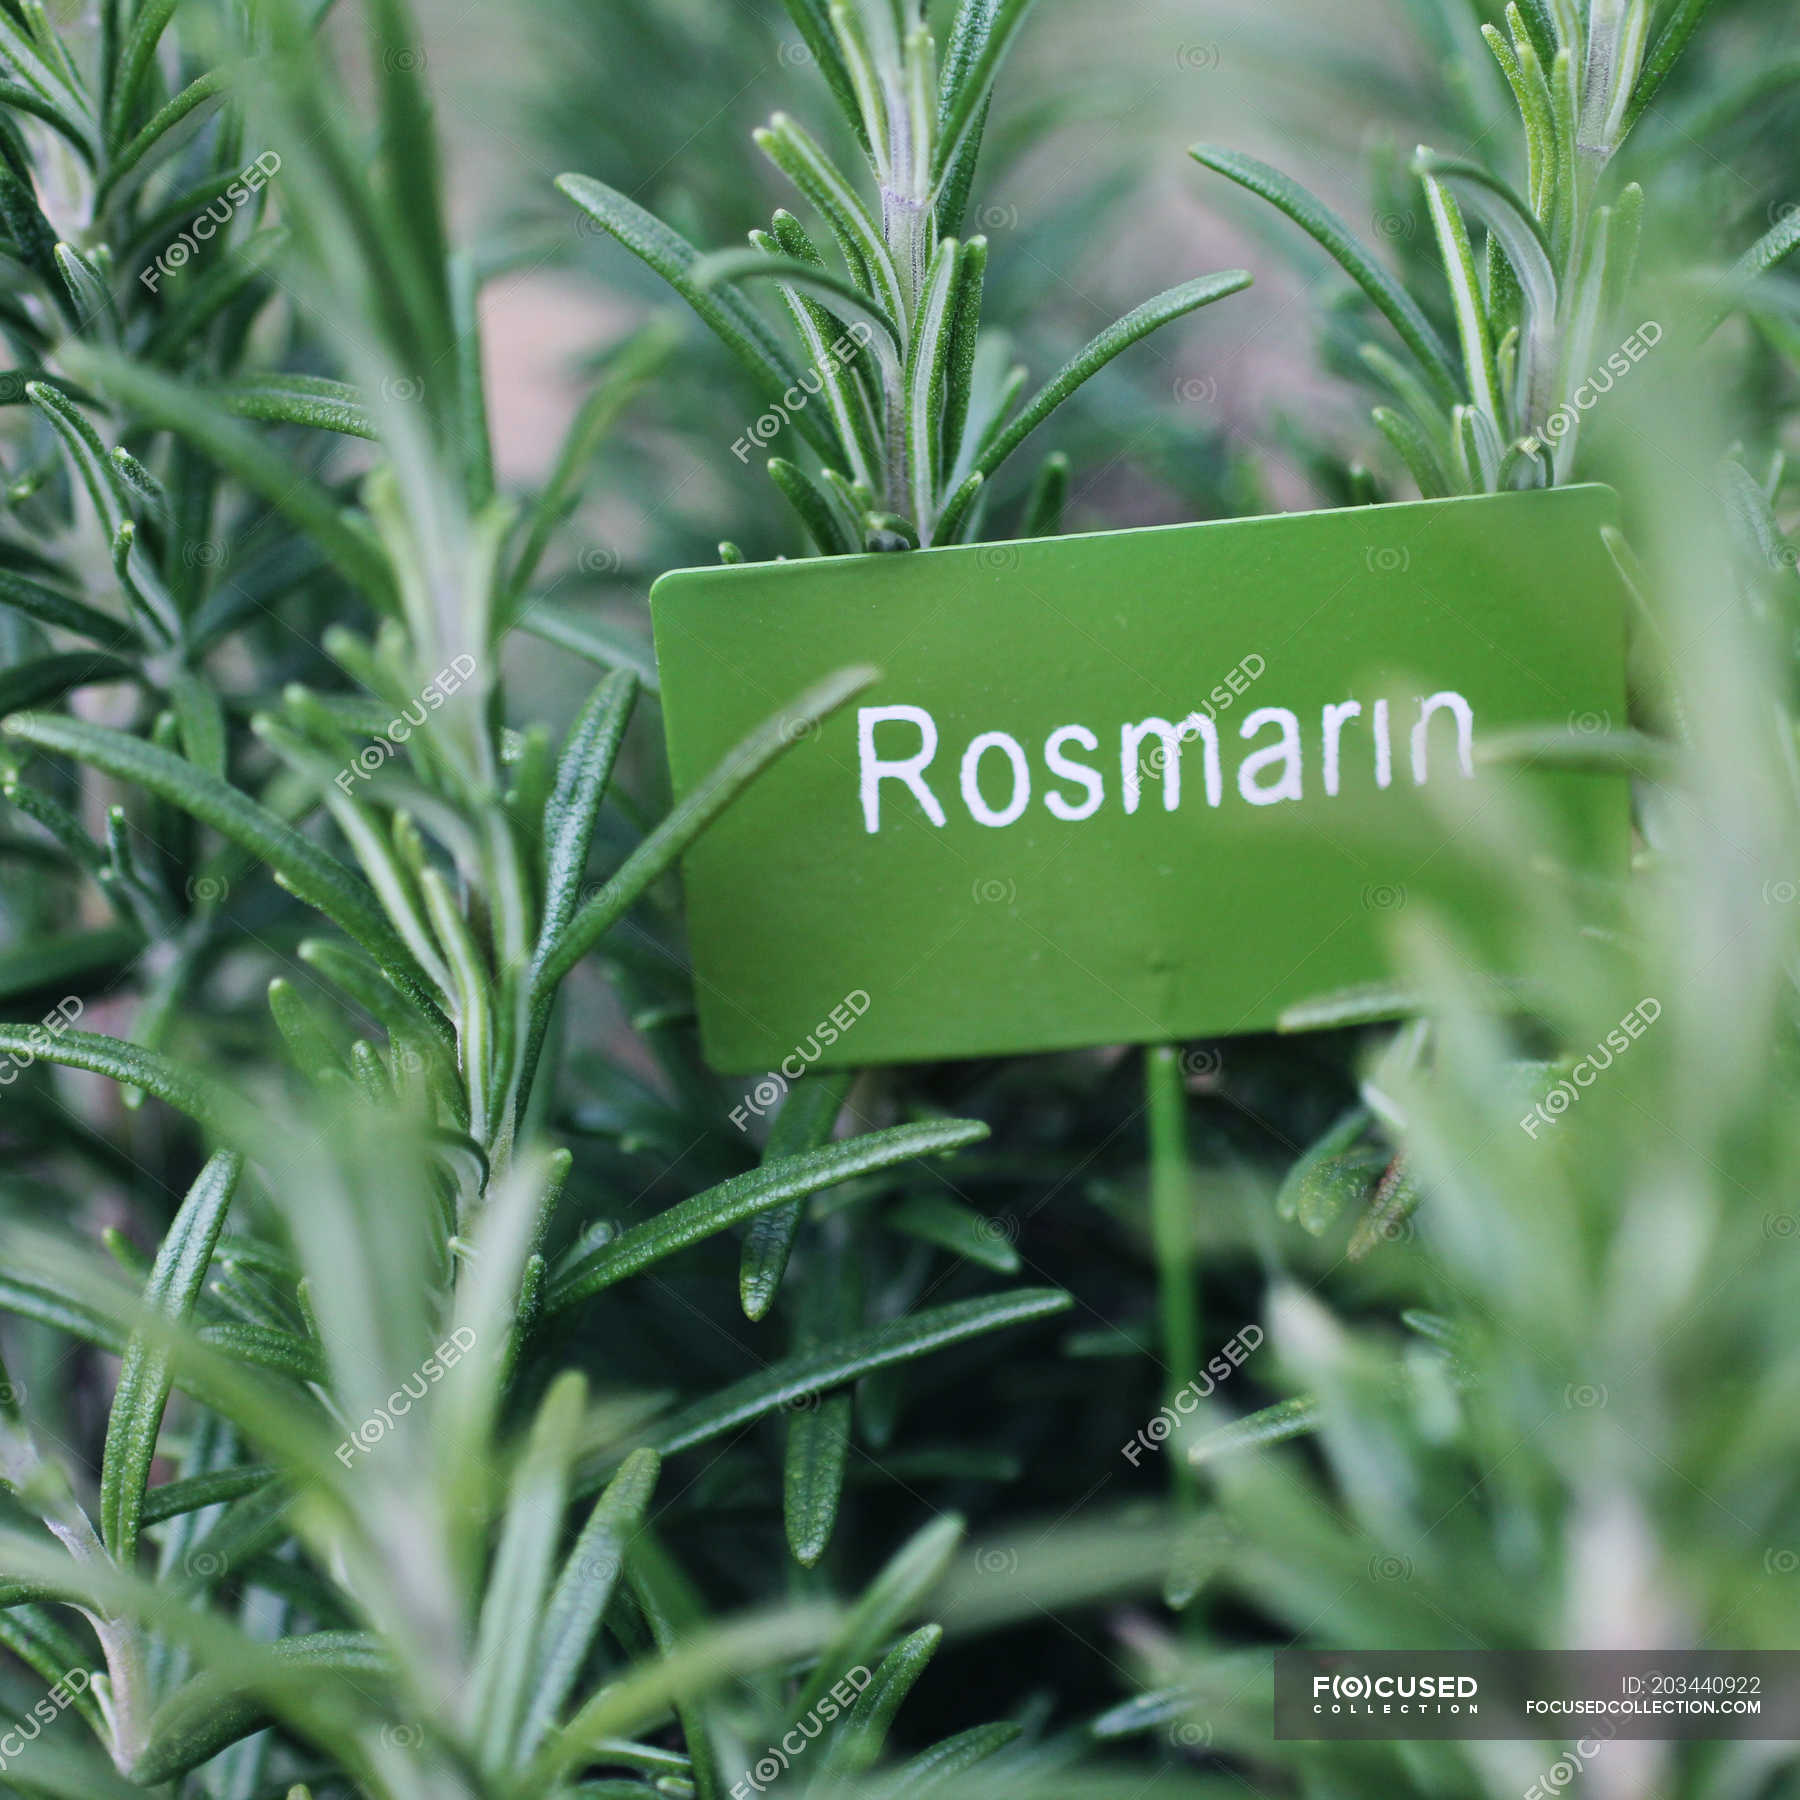 Rosemary Growing In Herb Garden With Paper Card And Name Of Plant